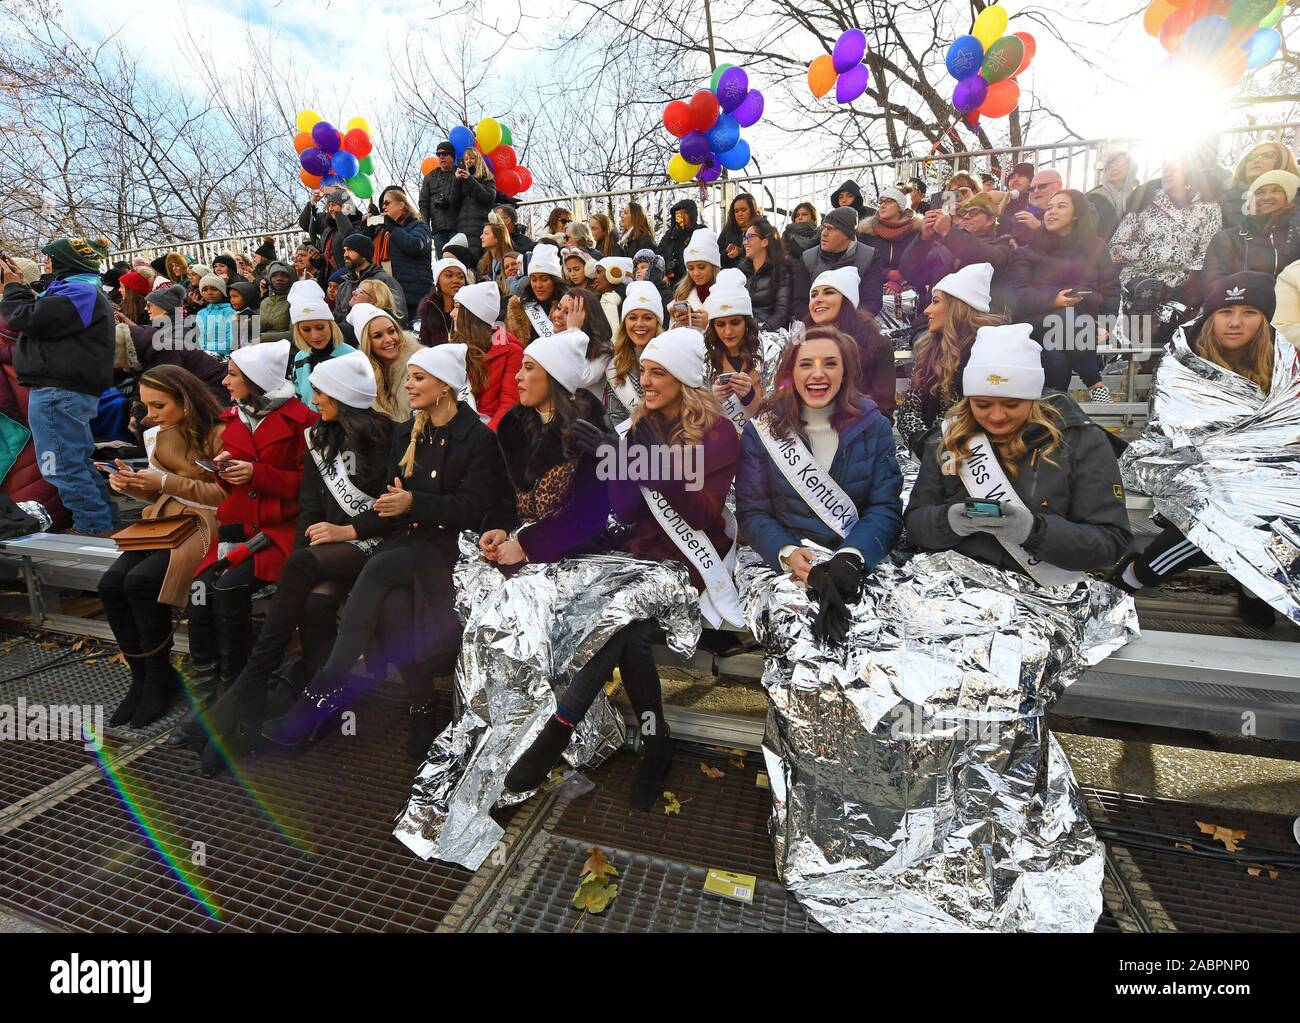 New York, USA. 28th Nov, 2019. Miss United States beauty pageants watch the 2019 Macy's Thanksgiving Day Parade in New York, the United States, on Nov. 28, 2019. Credit: Li Rui/Xinhua/Alamy Live News Stock Photo